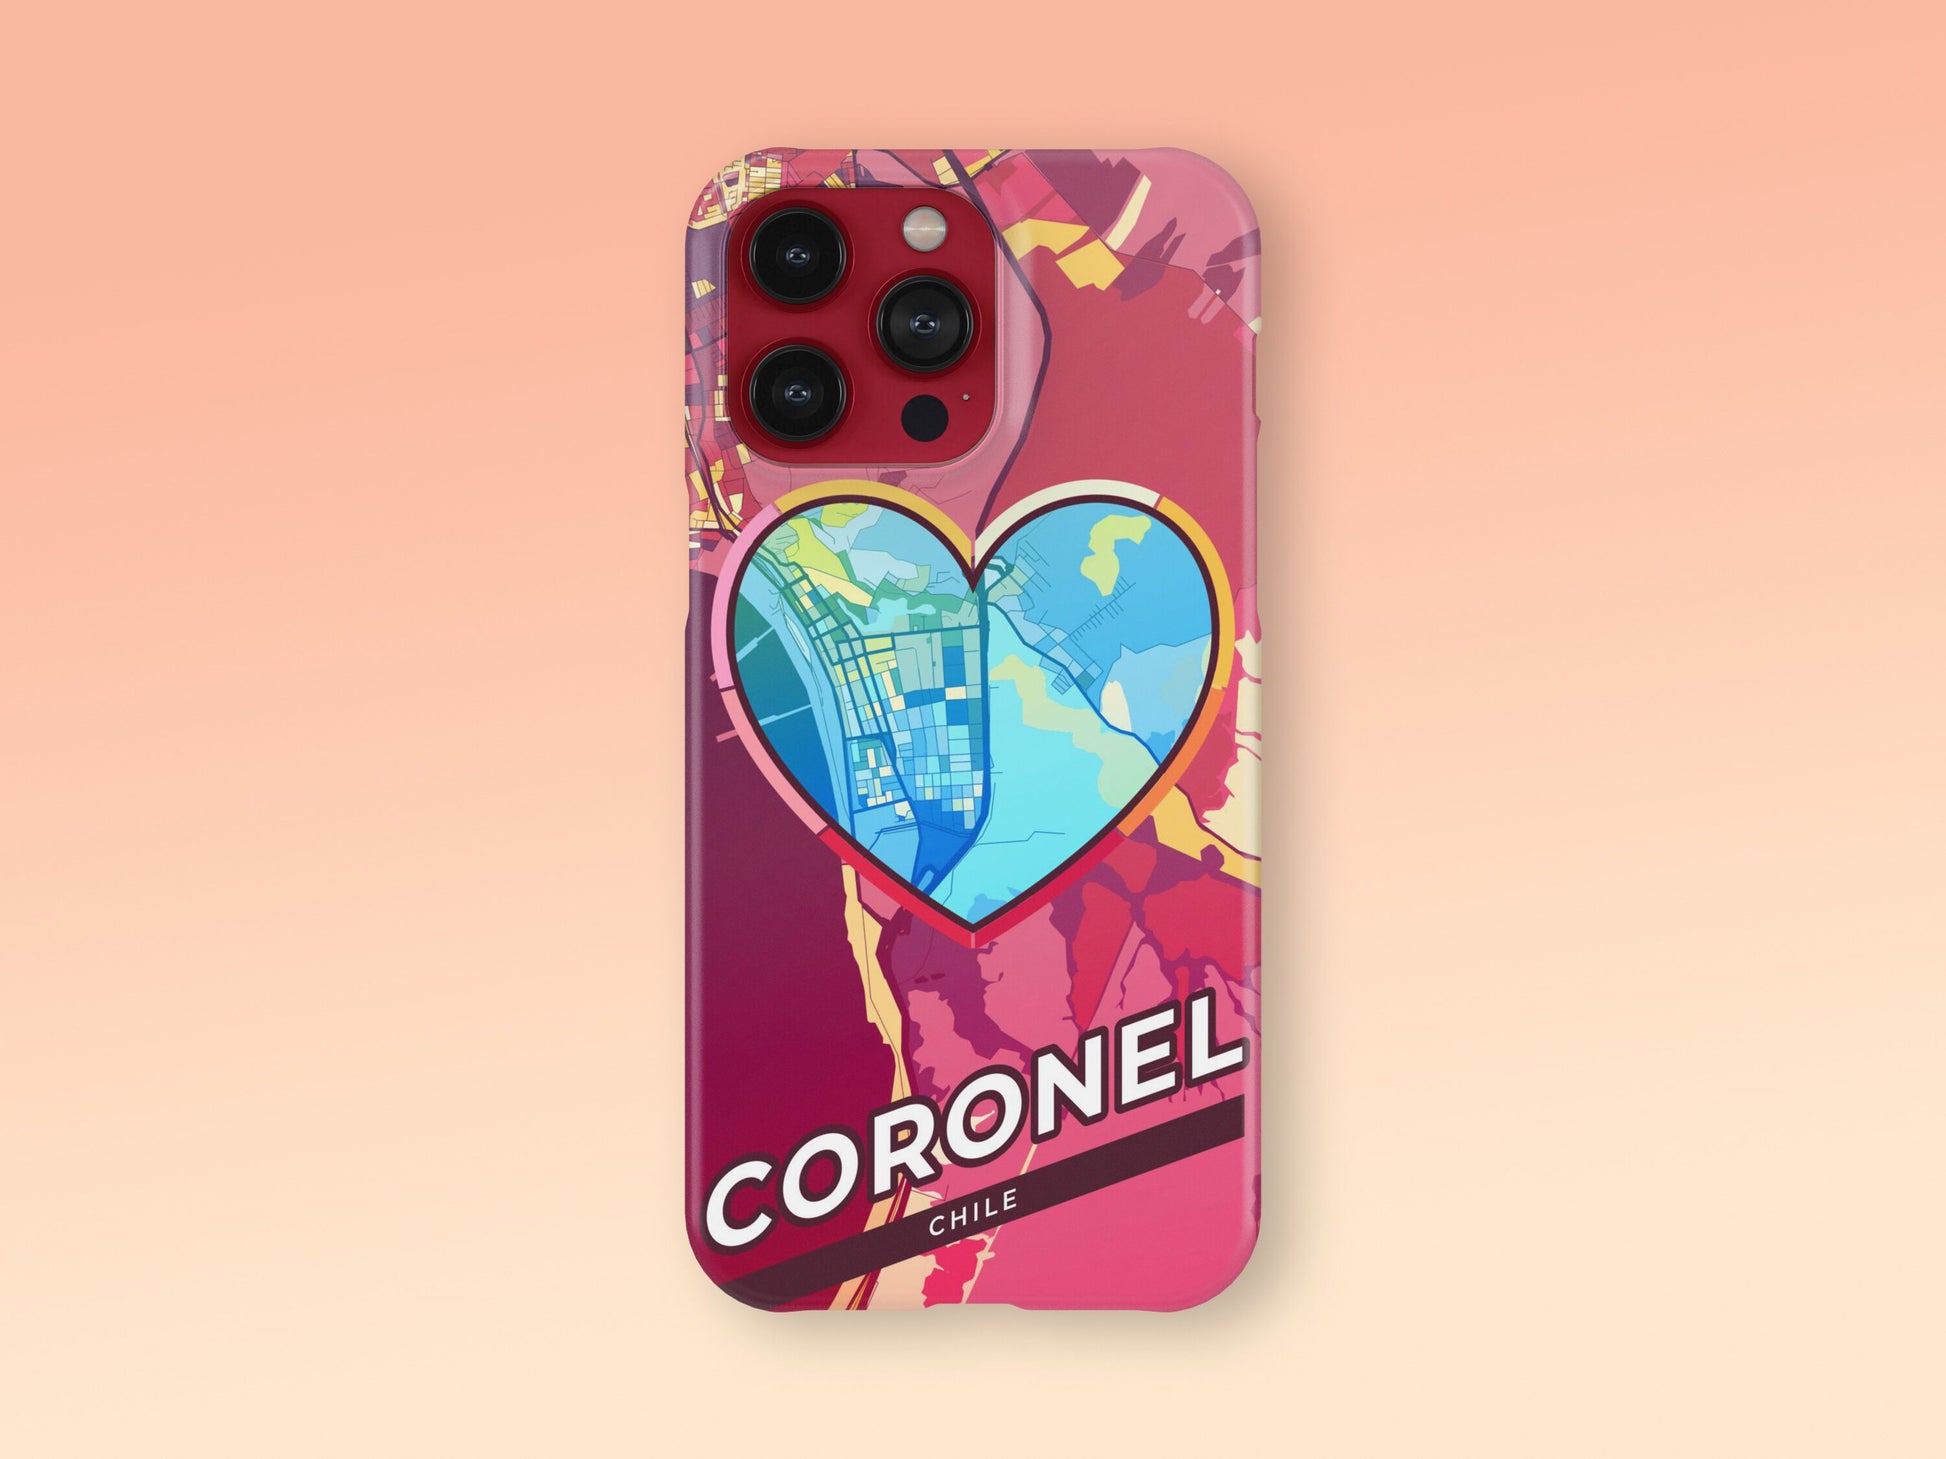 Coronel Chile slim phone case with colorful icon. Birthday, wedding or housewarming gift. Couple match cases. 2